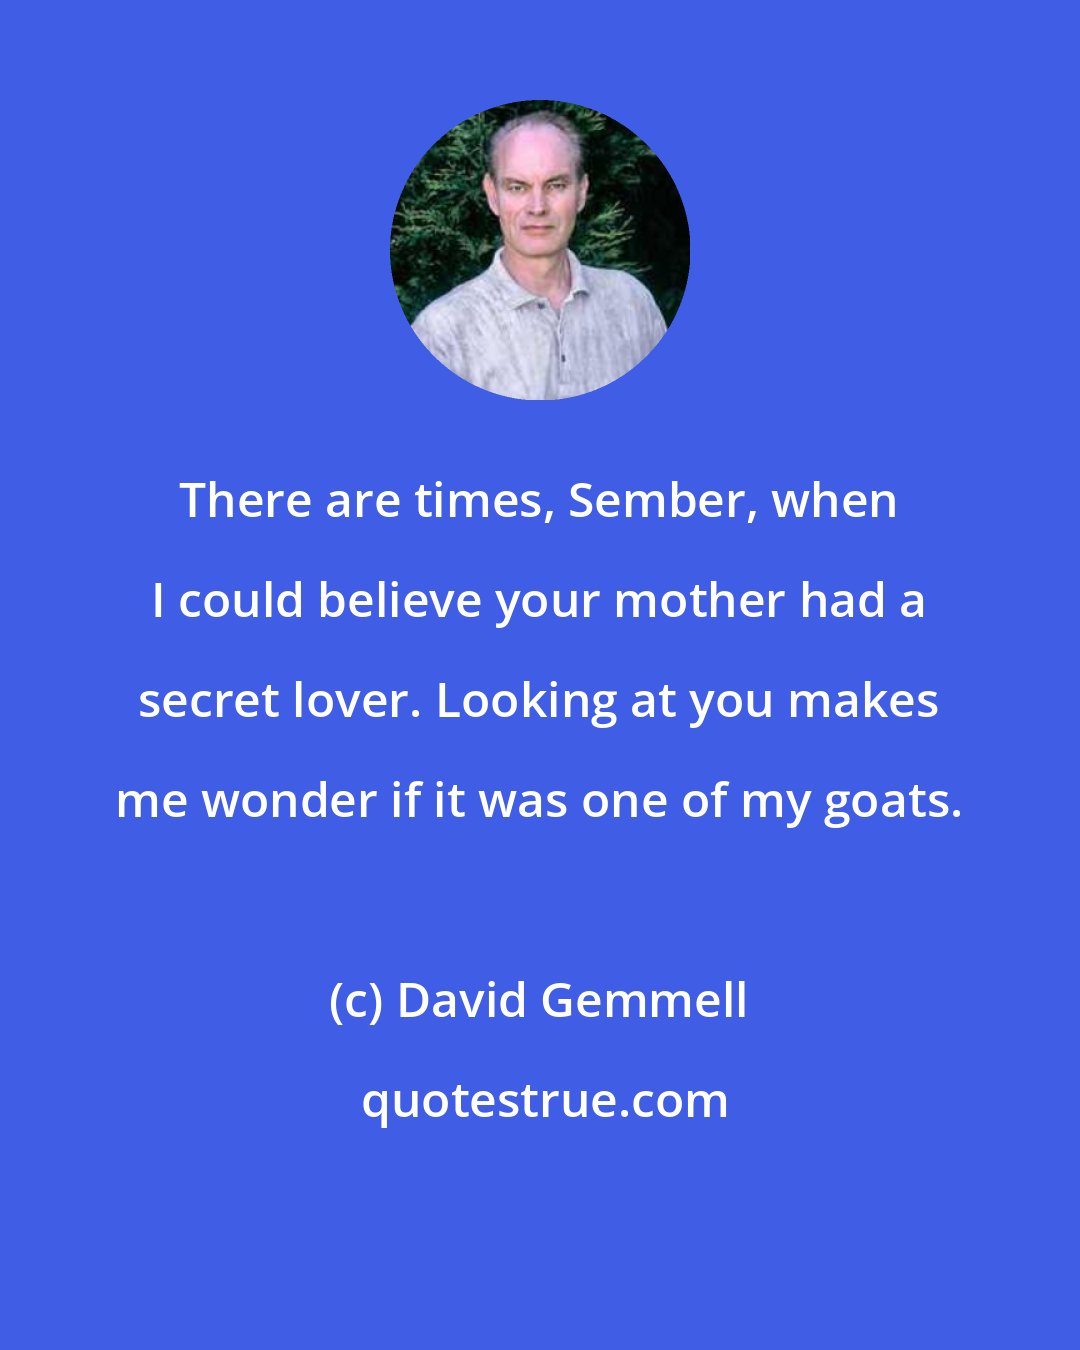 David Gemmell: There are times, Sember, when I could believe your mother had a secret lover. Looking at you makes me wonder if it was one of my goats.